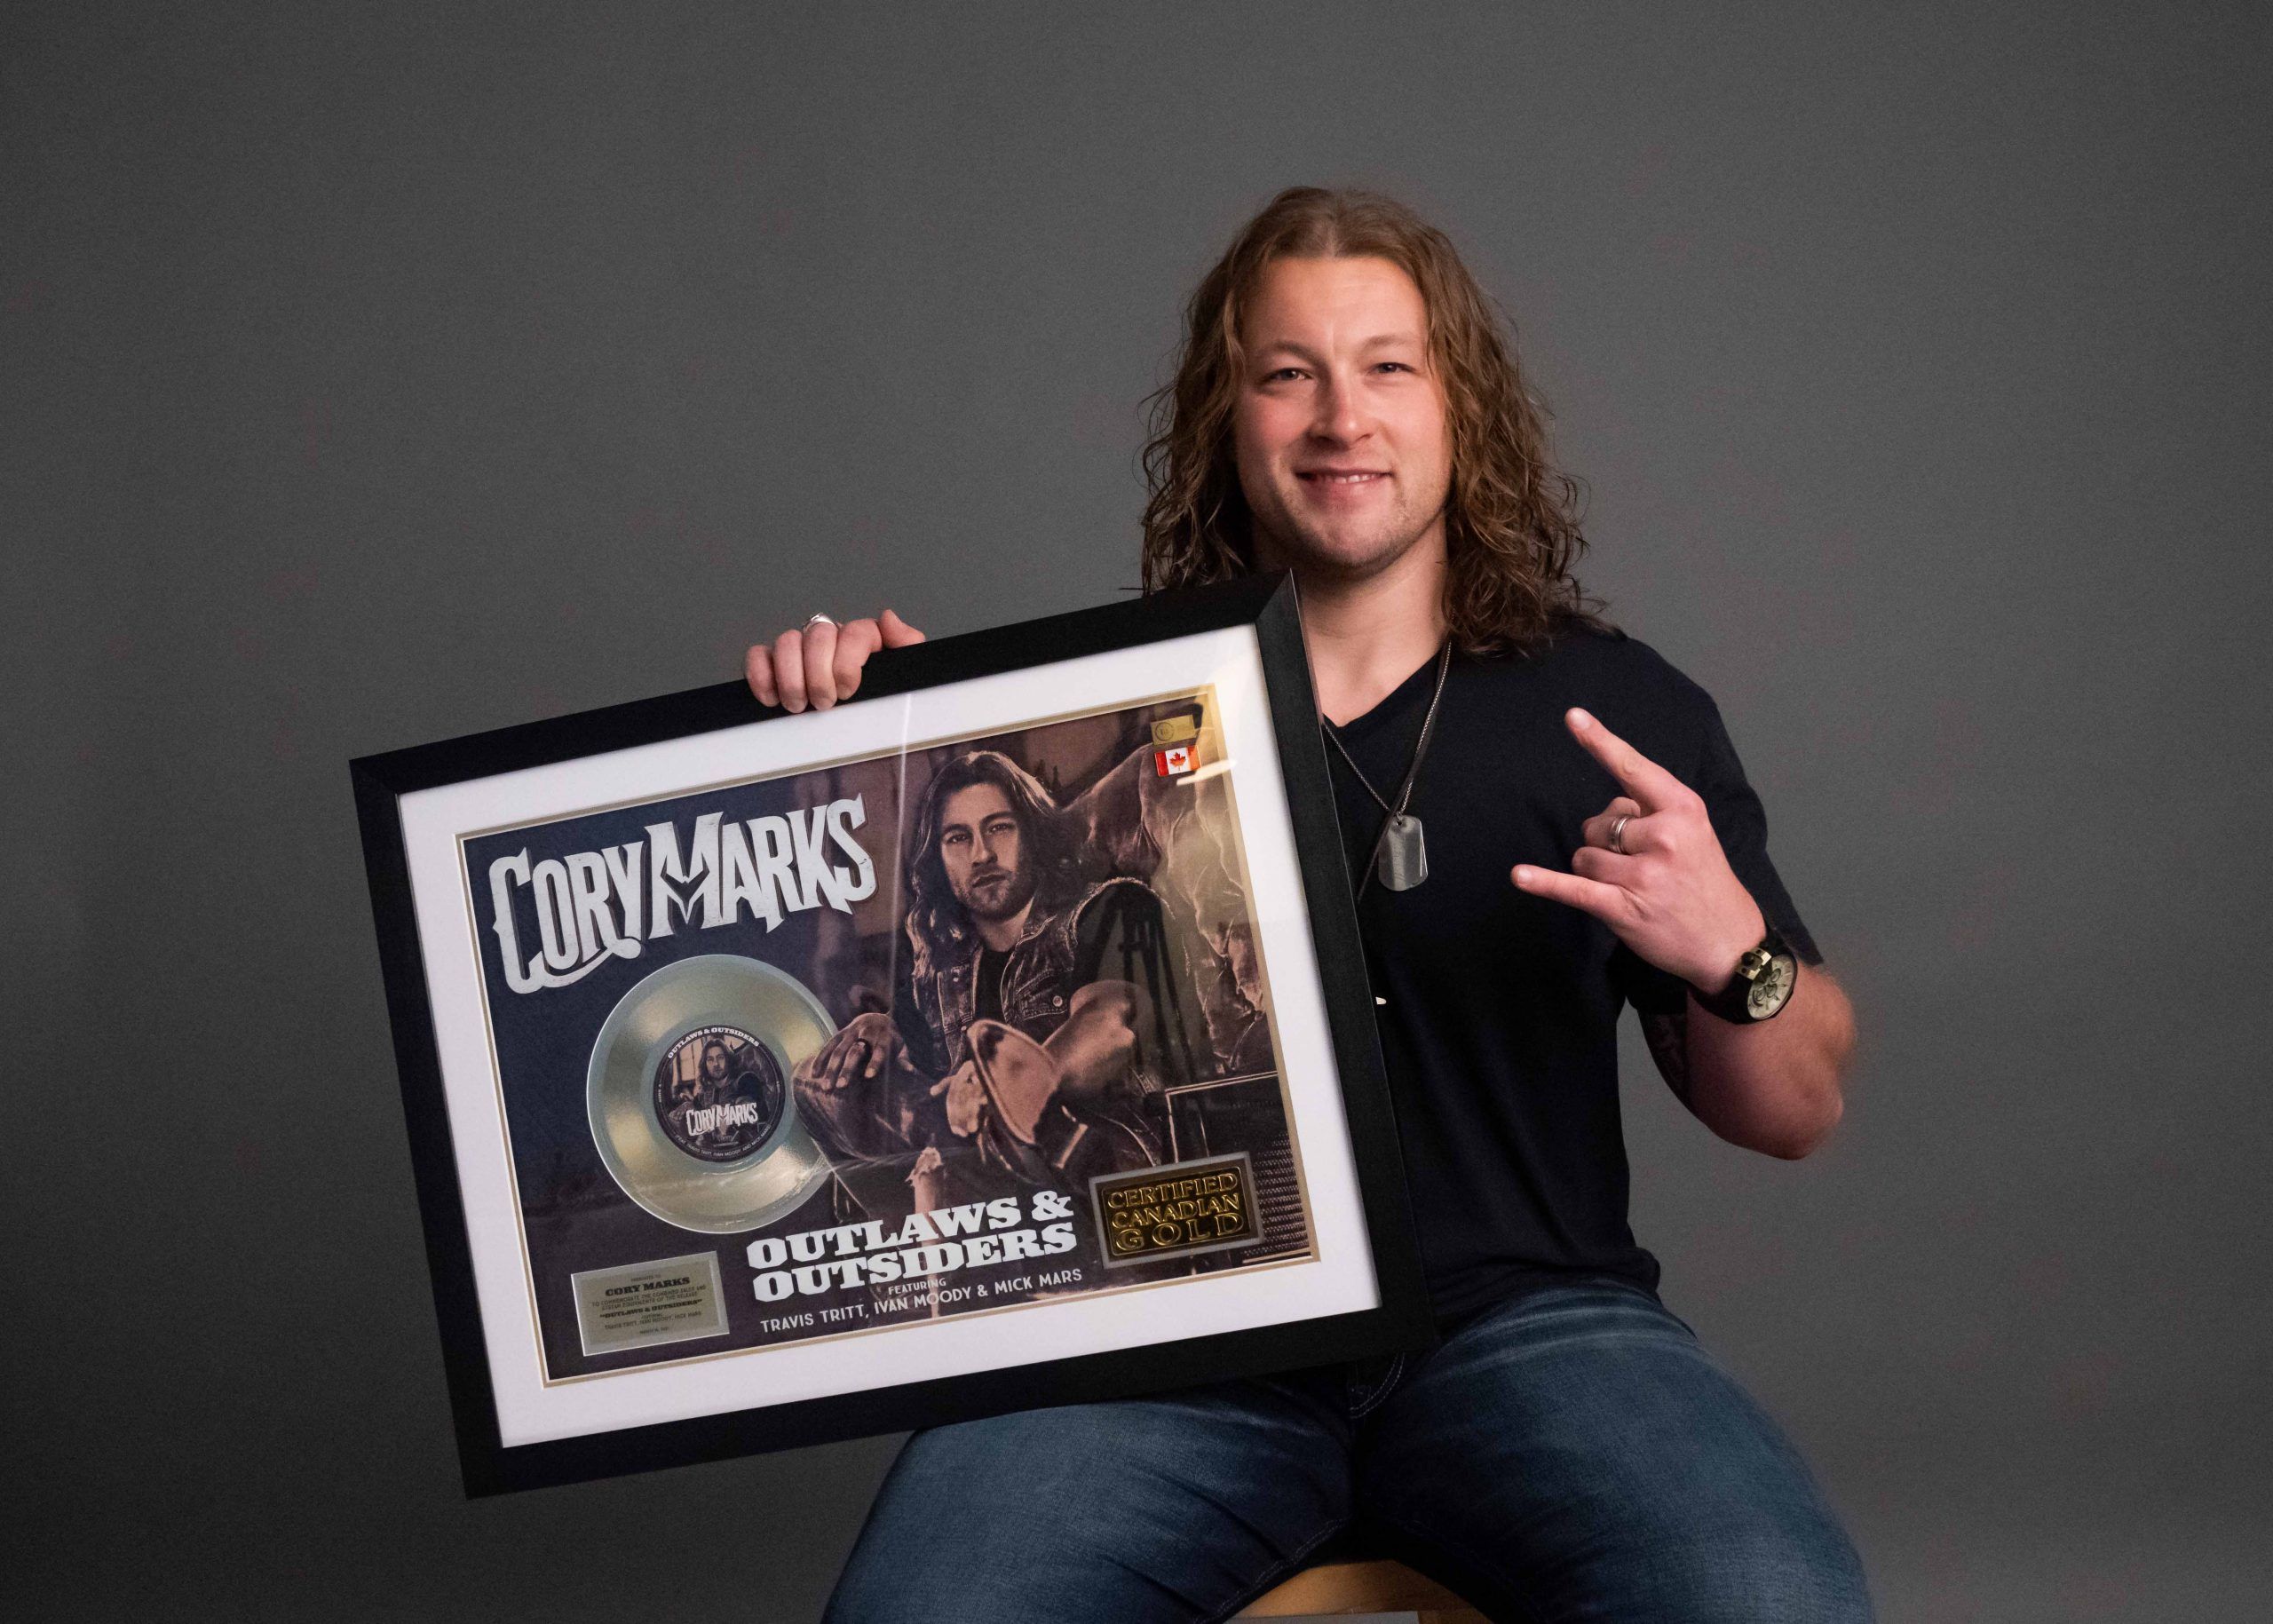 Cory Marks' single certified Gold The Daily Press